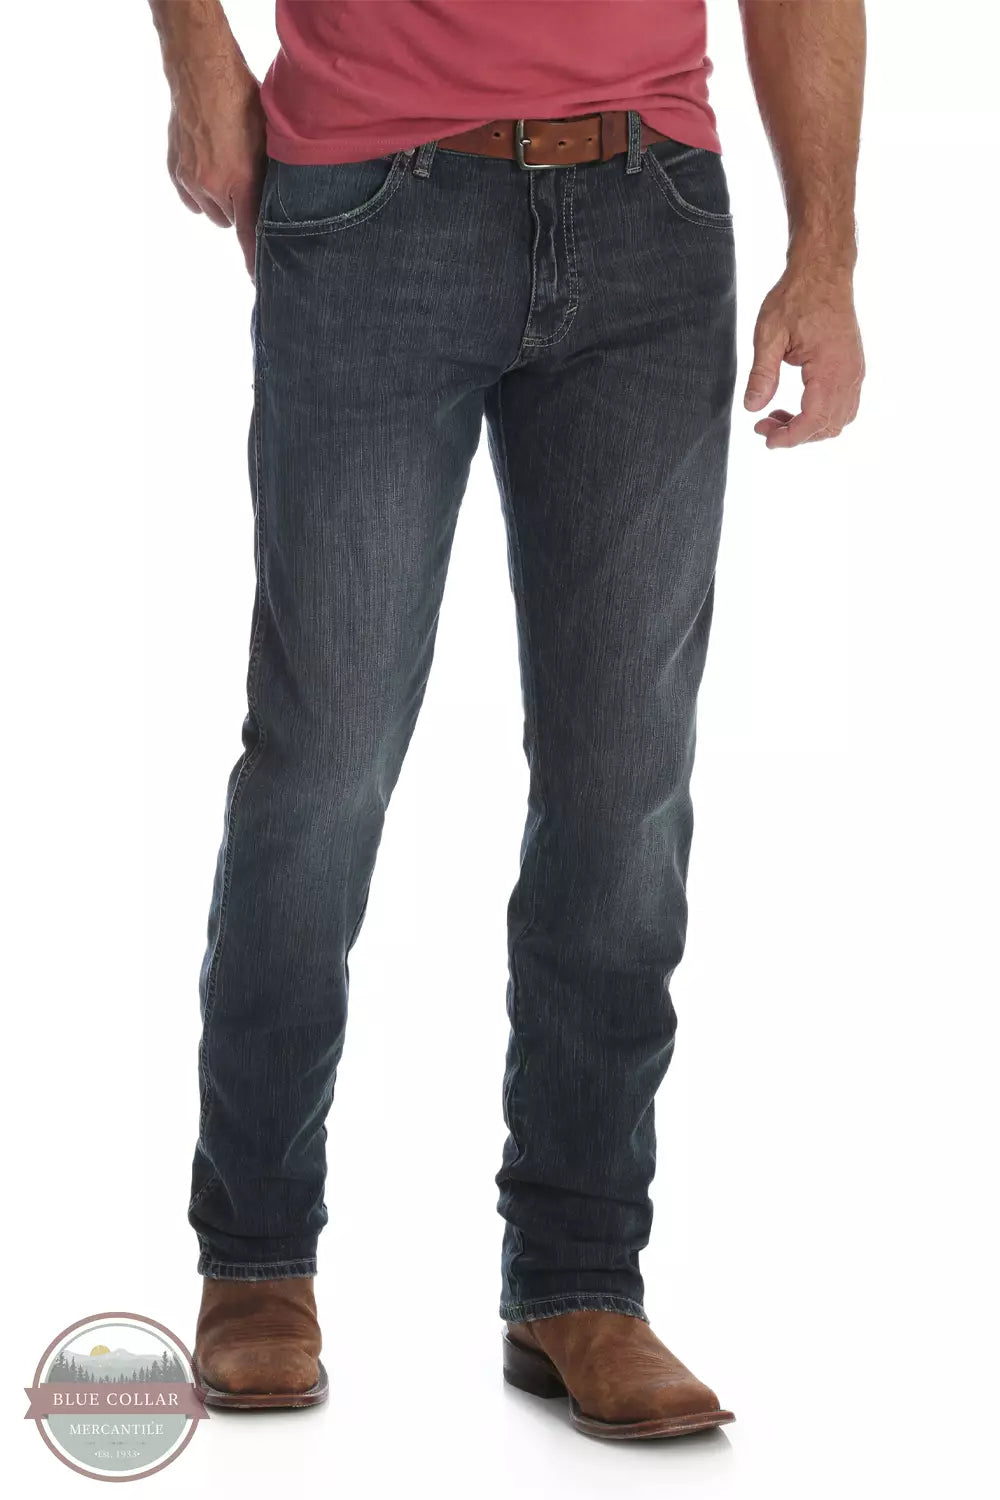 Wrangler 88MWZJM Retro® Slim Fit Straight Jeans in Jerome Front View